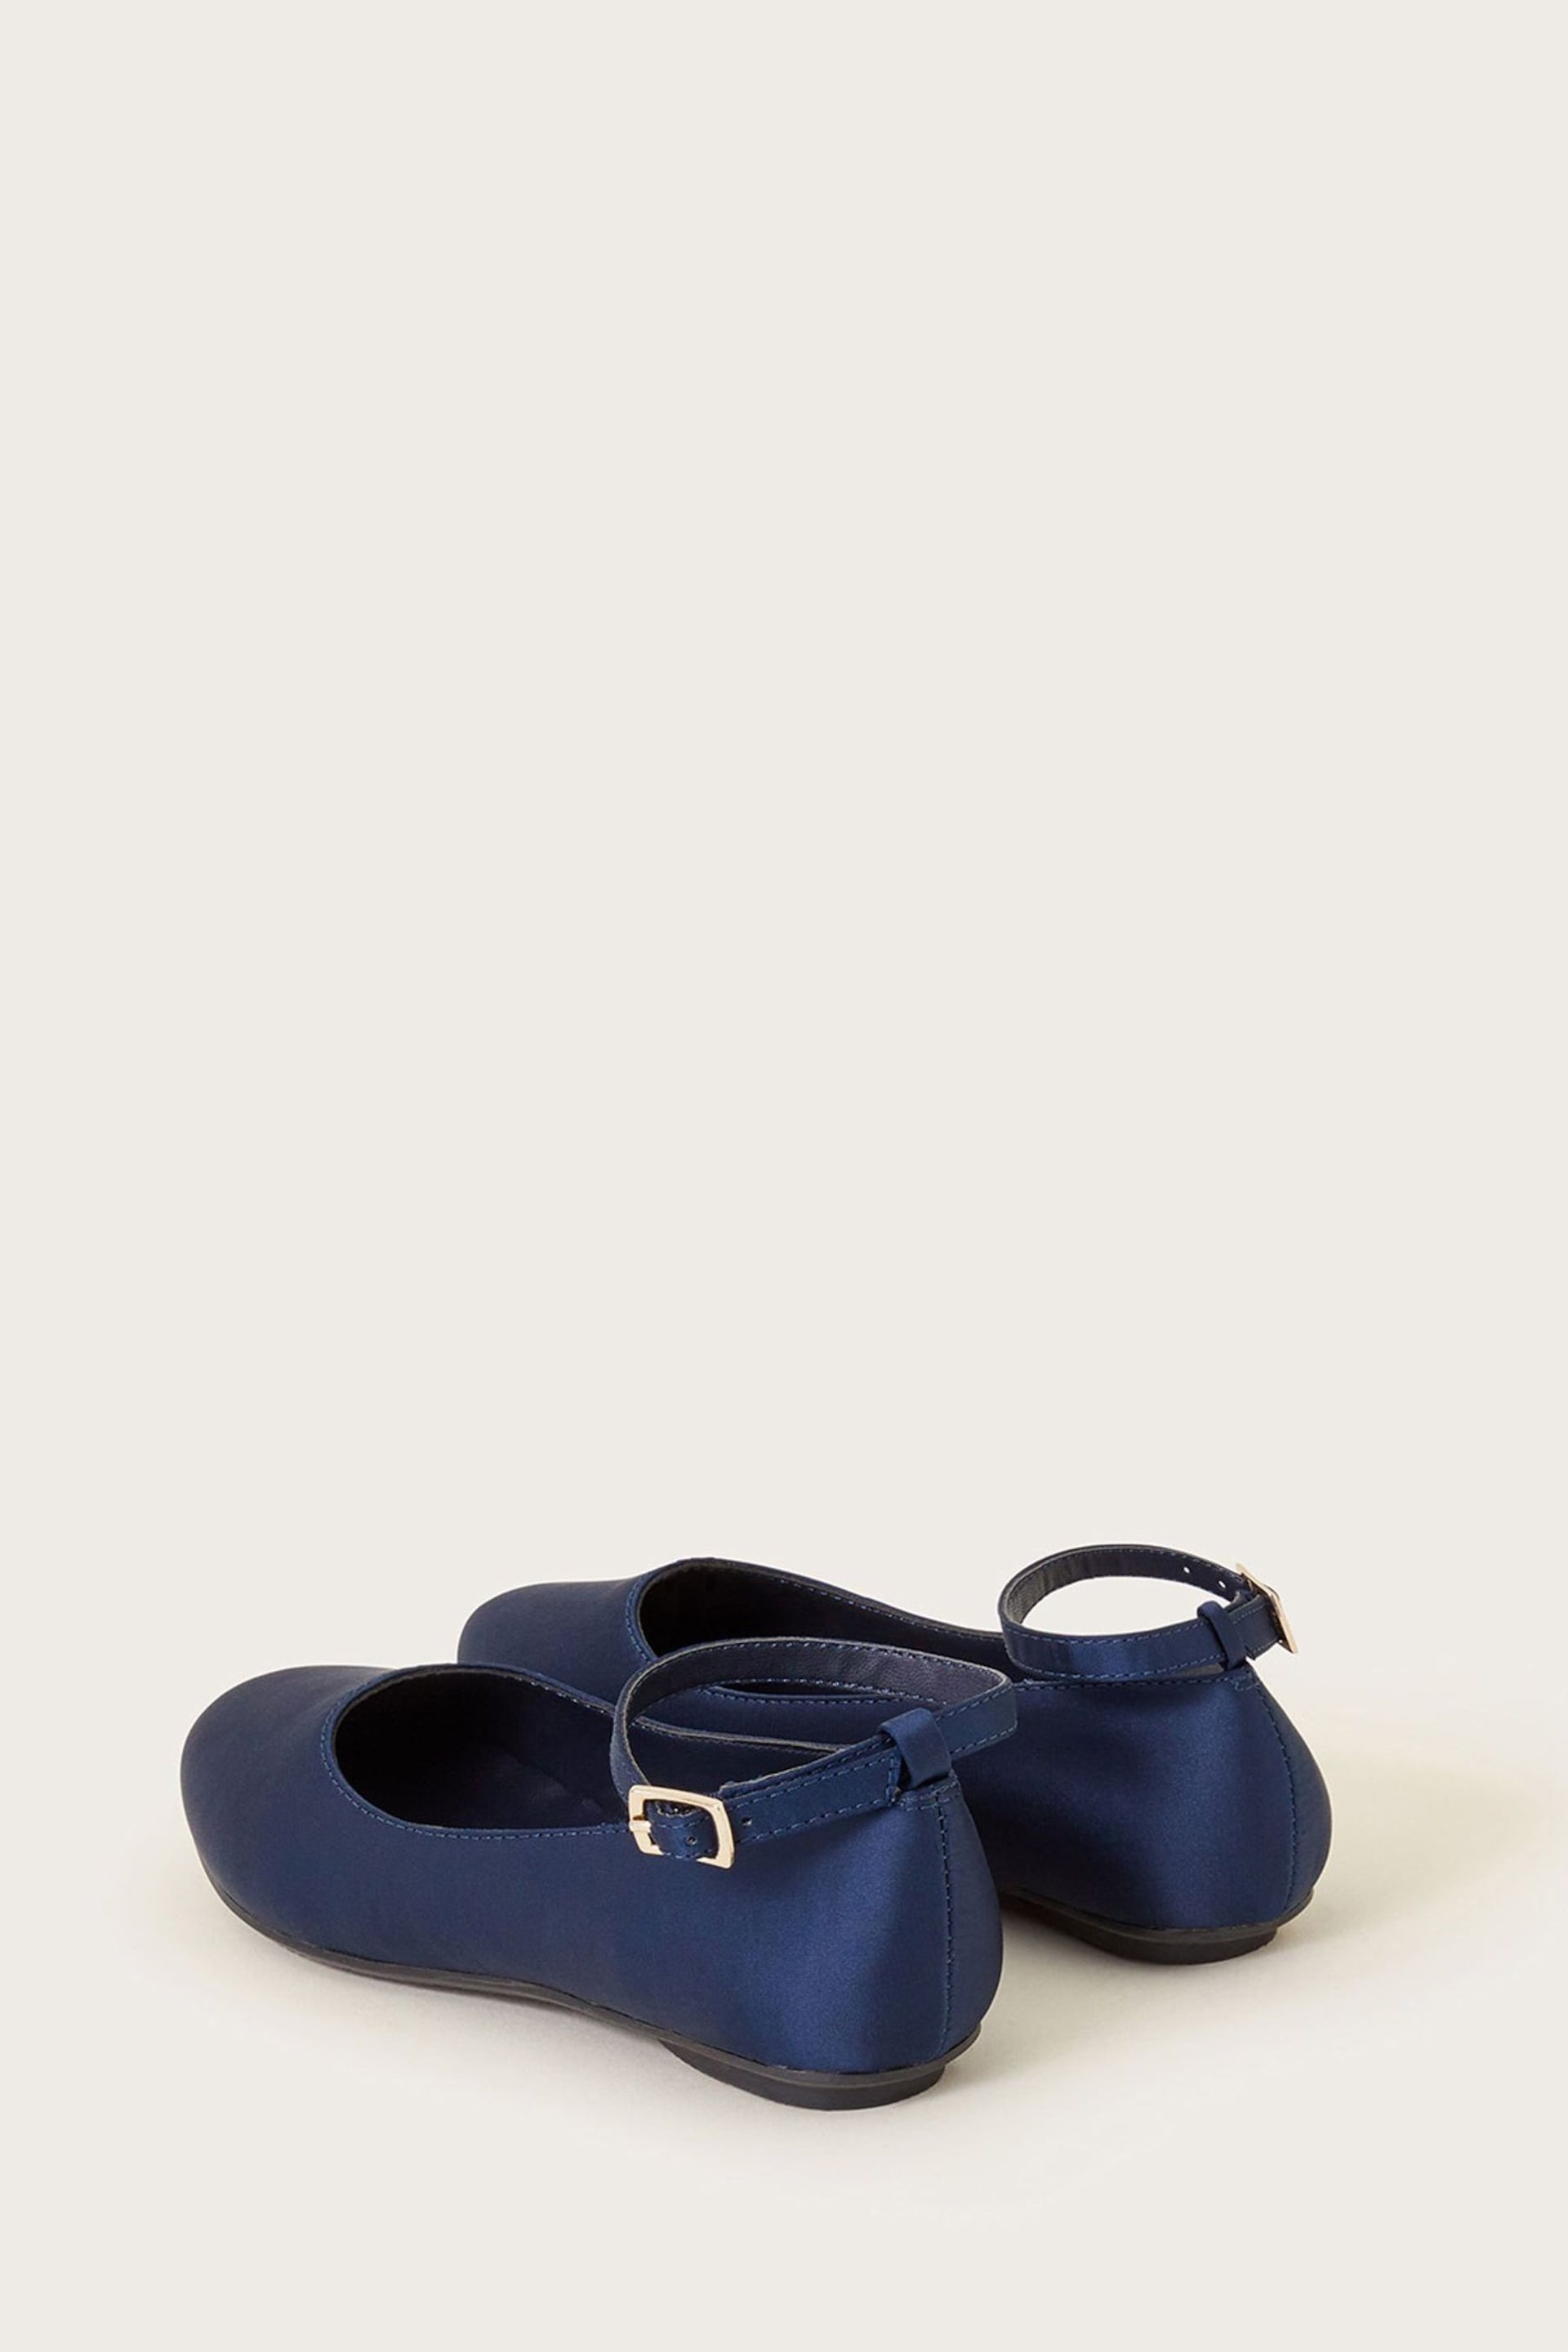 Monsoon Blue Ankle Strap Ballet Shoes - Image 3 of 3